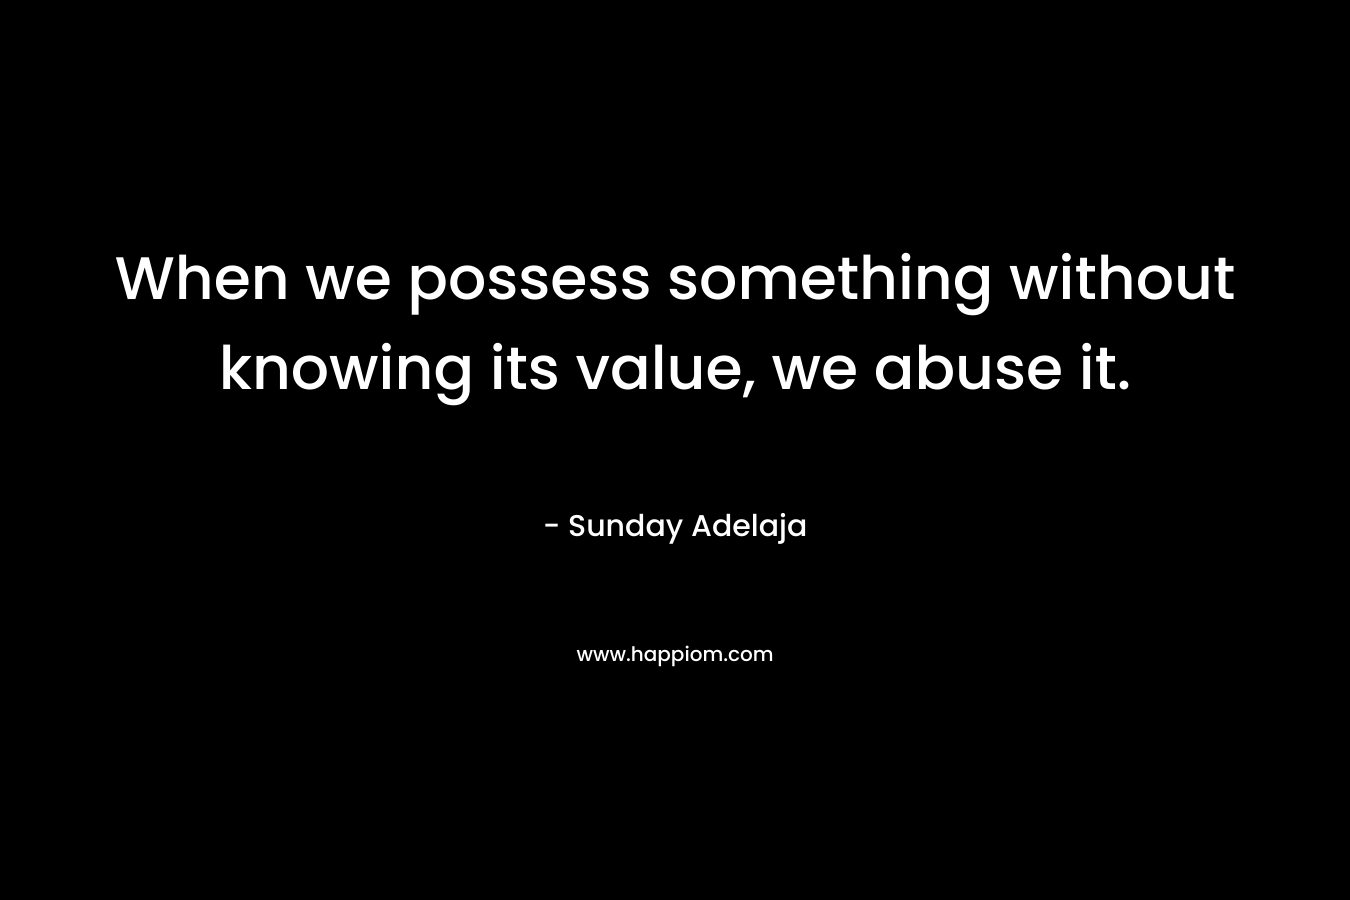 When we possess something without knowing its value, we abuse it.